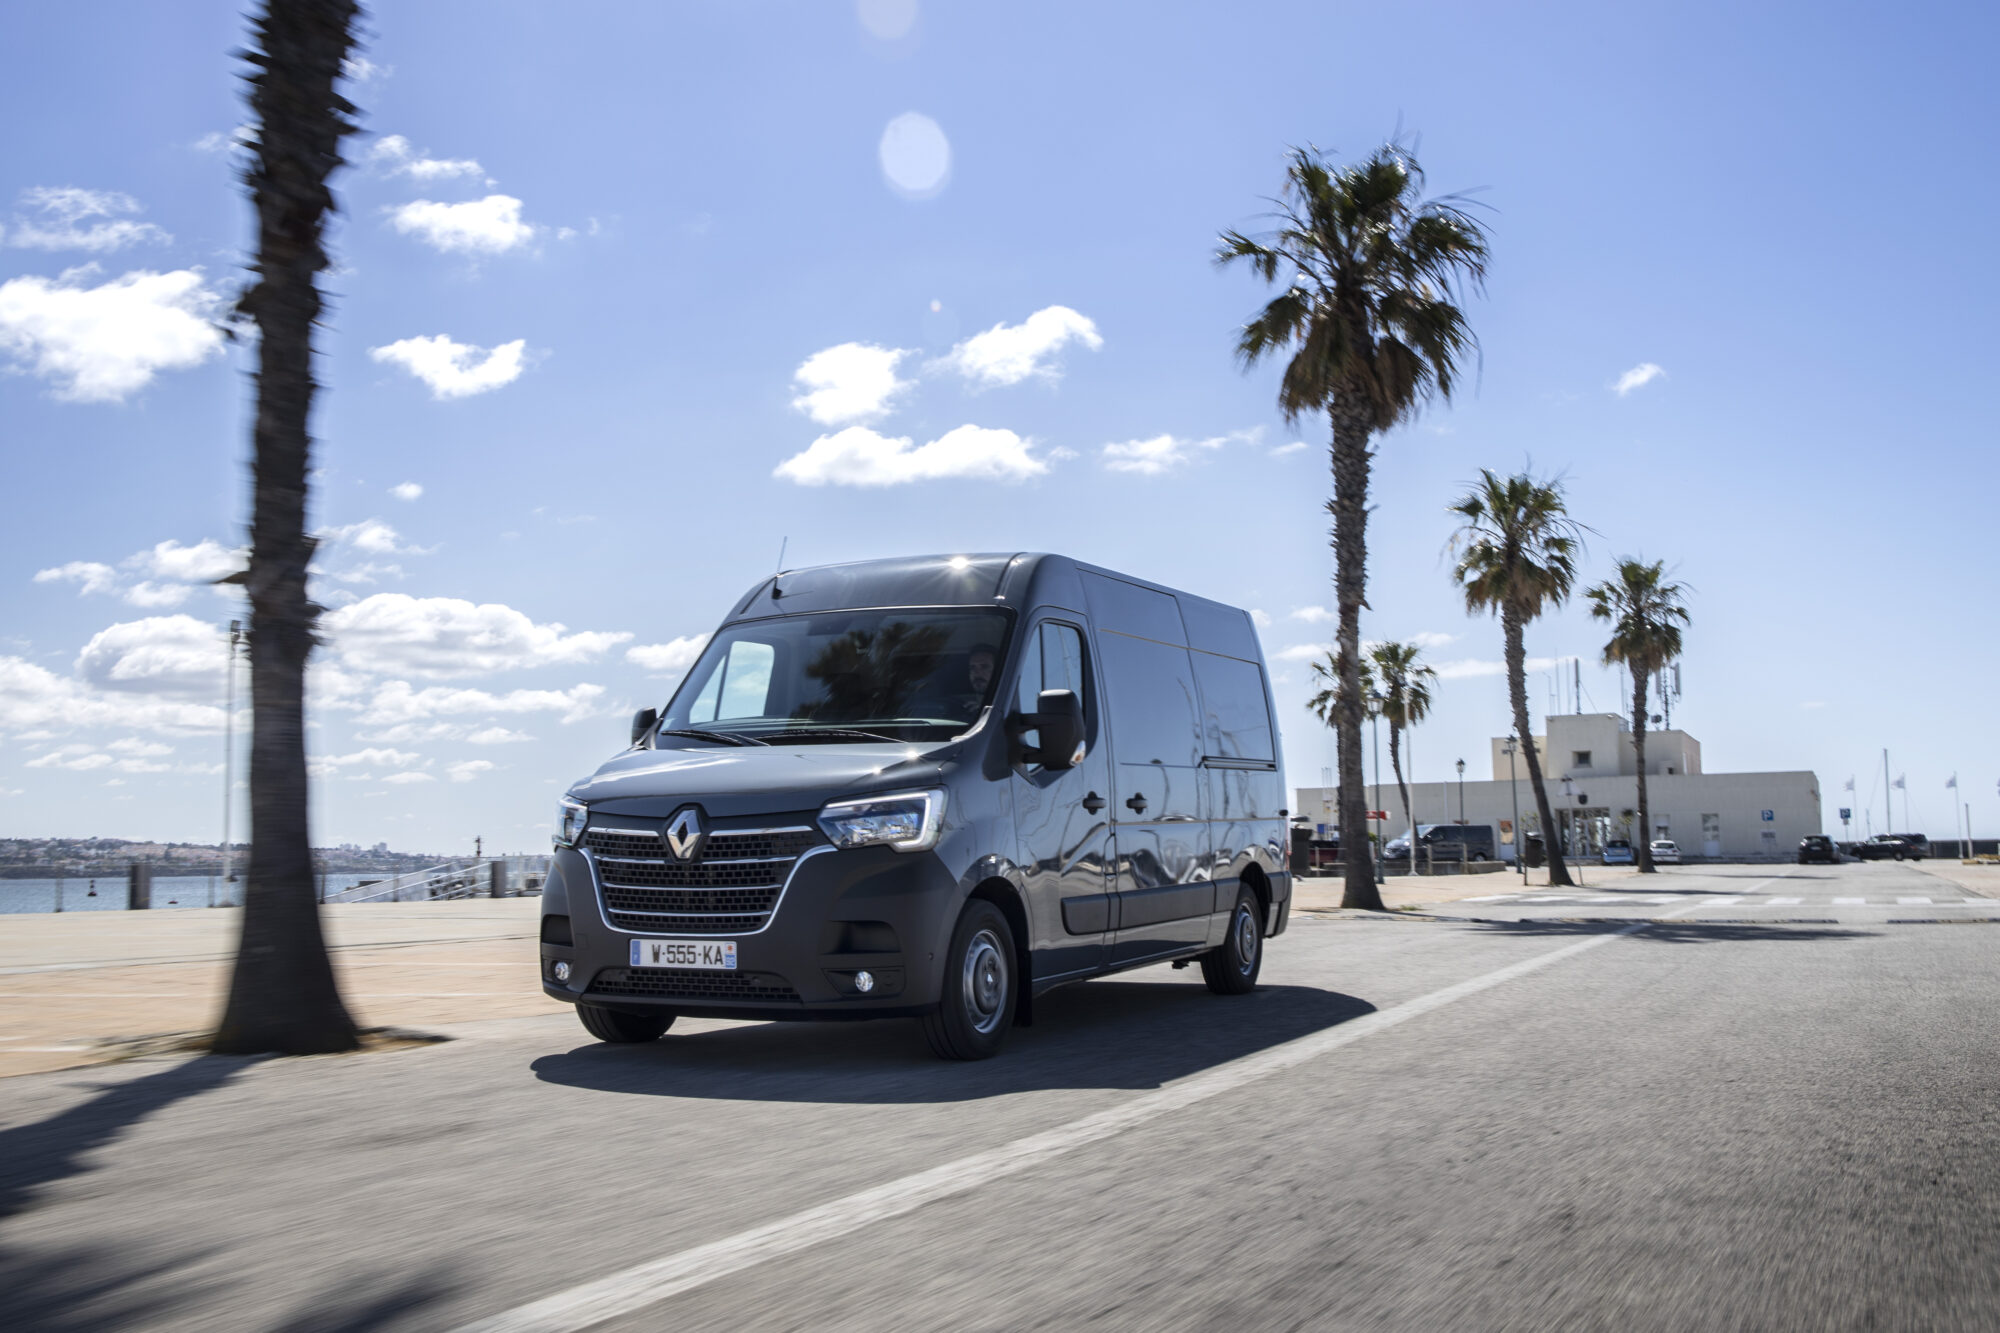 2019 - New Renault MASTER press tests in Portugal